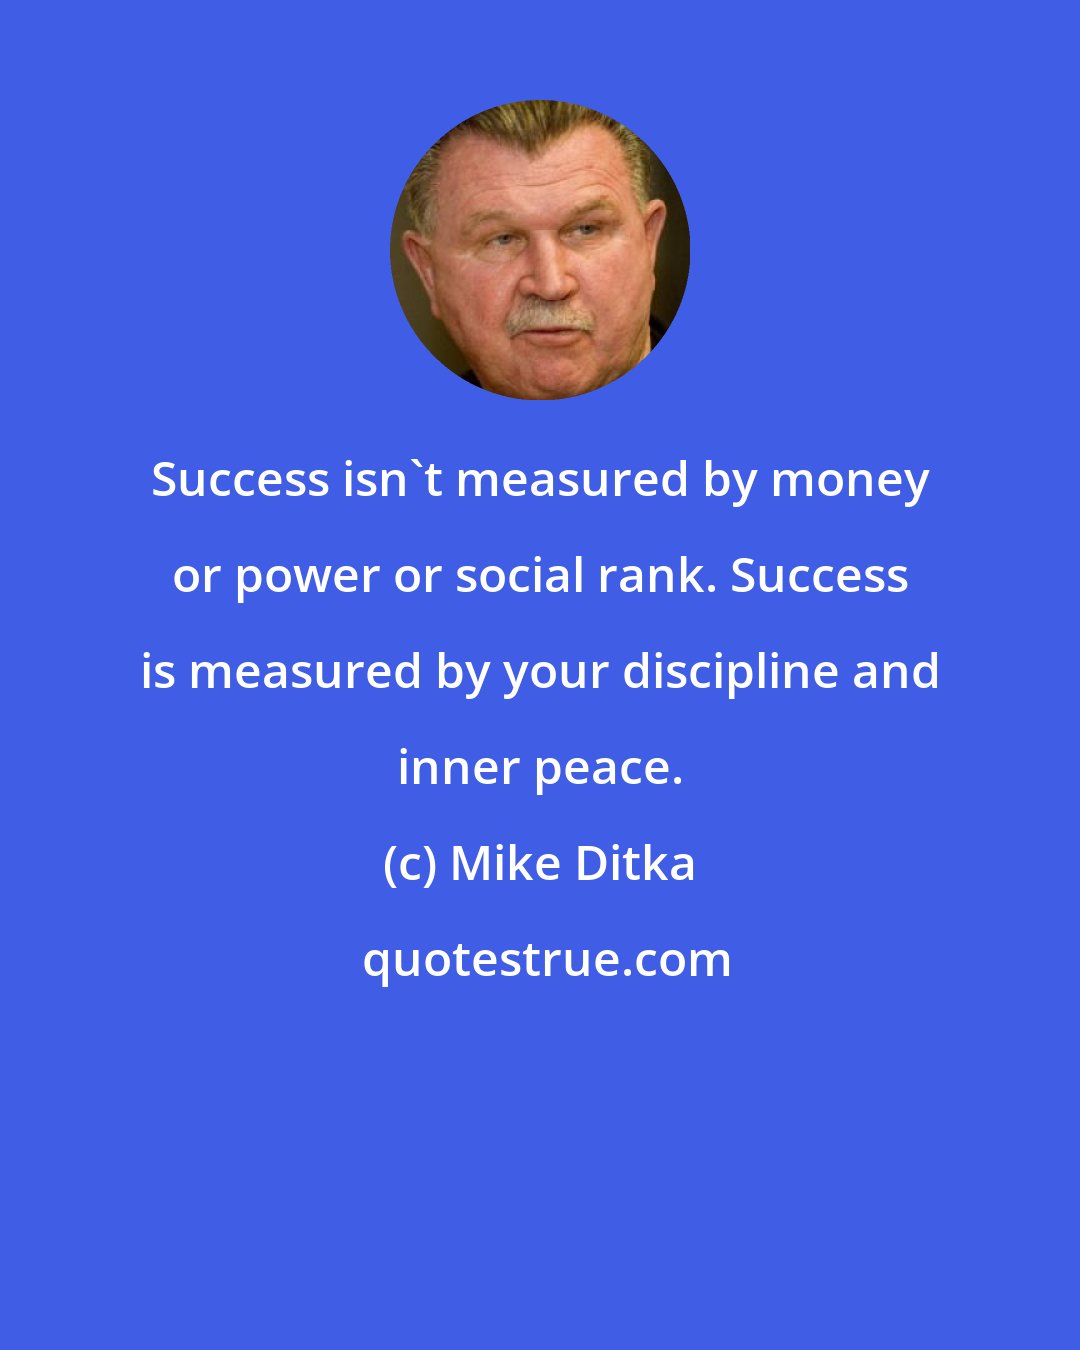 Mike Ditka: Success isn't measured by money or power or social rank. Success is measured by your discipline and inner peace.